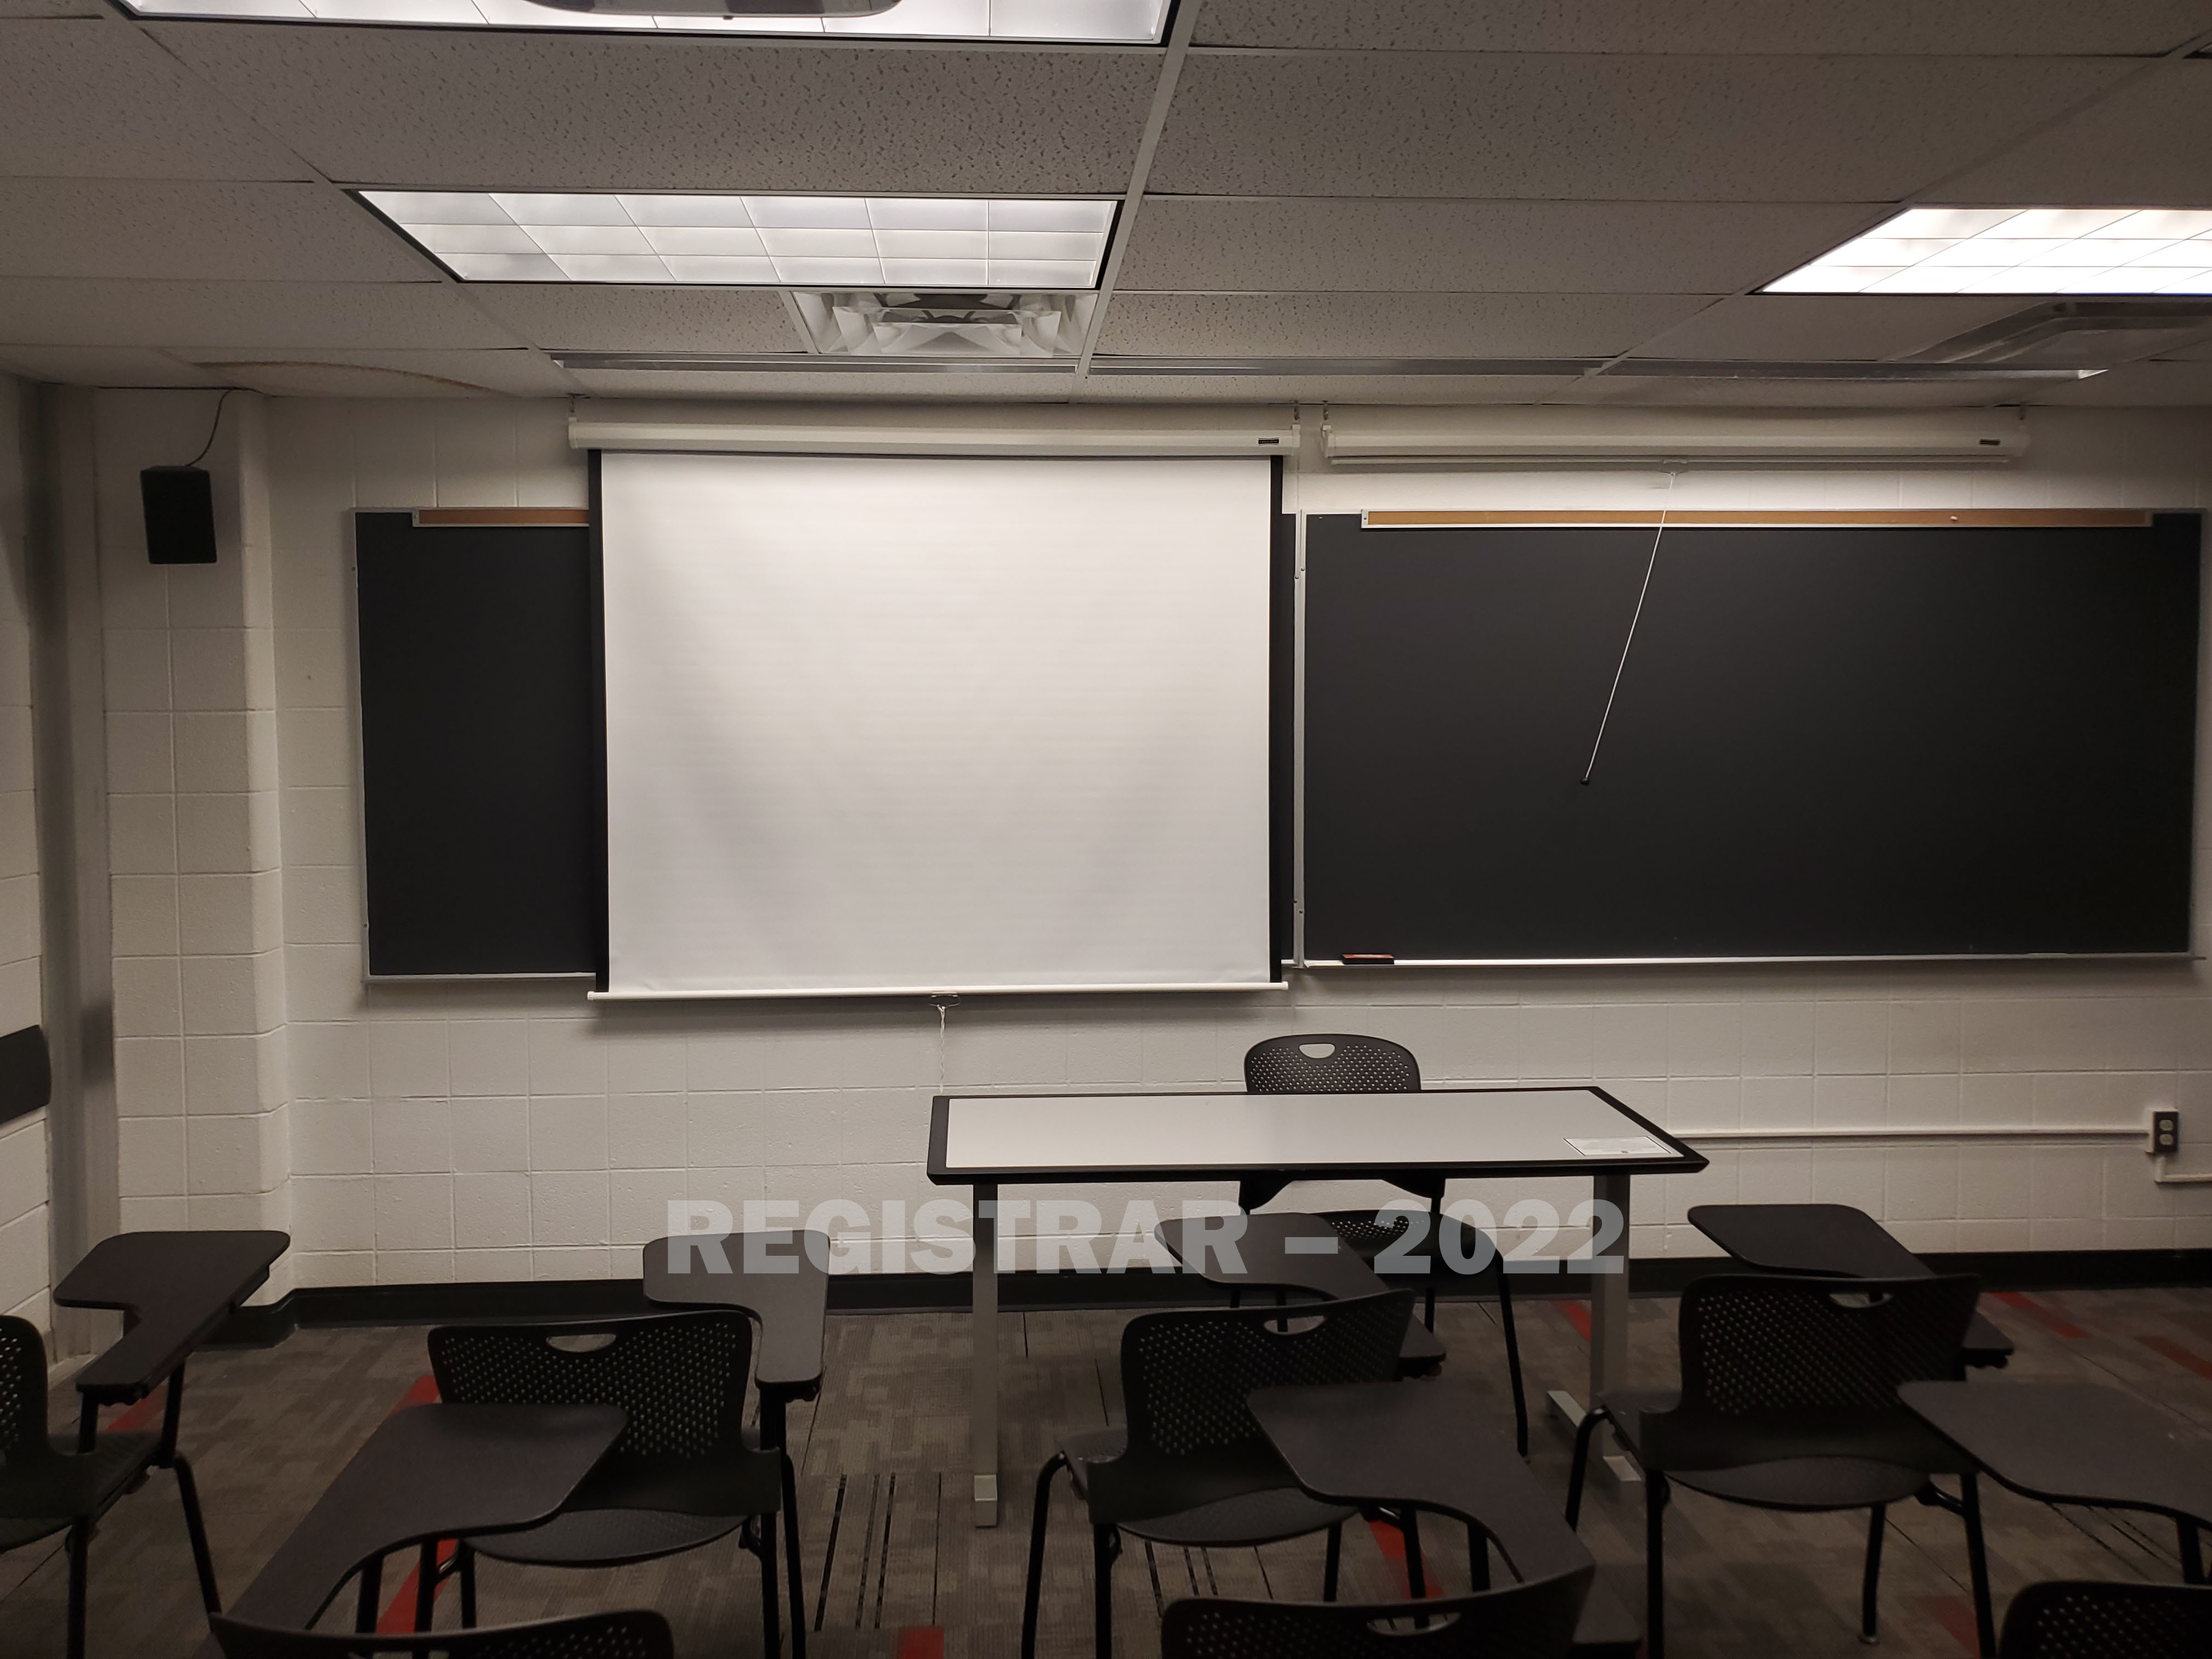 University Hall room 28 view from the back of the room with projector screen down